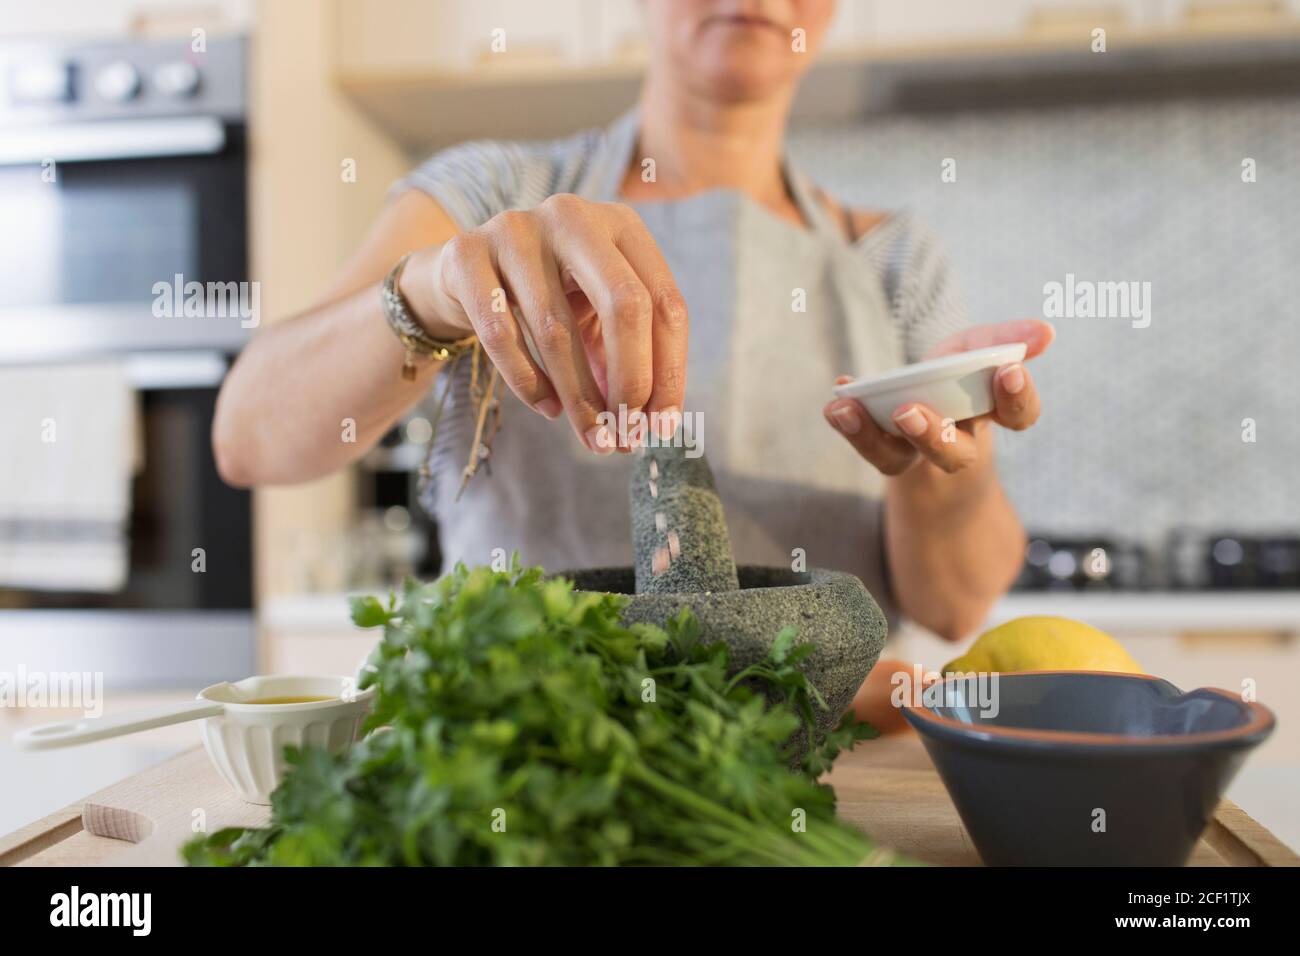 Woman cooking with mortar and pestle in kitchen Stock Photo